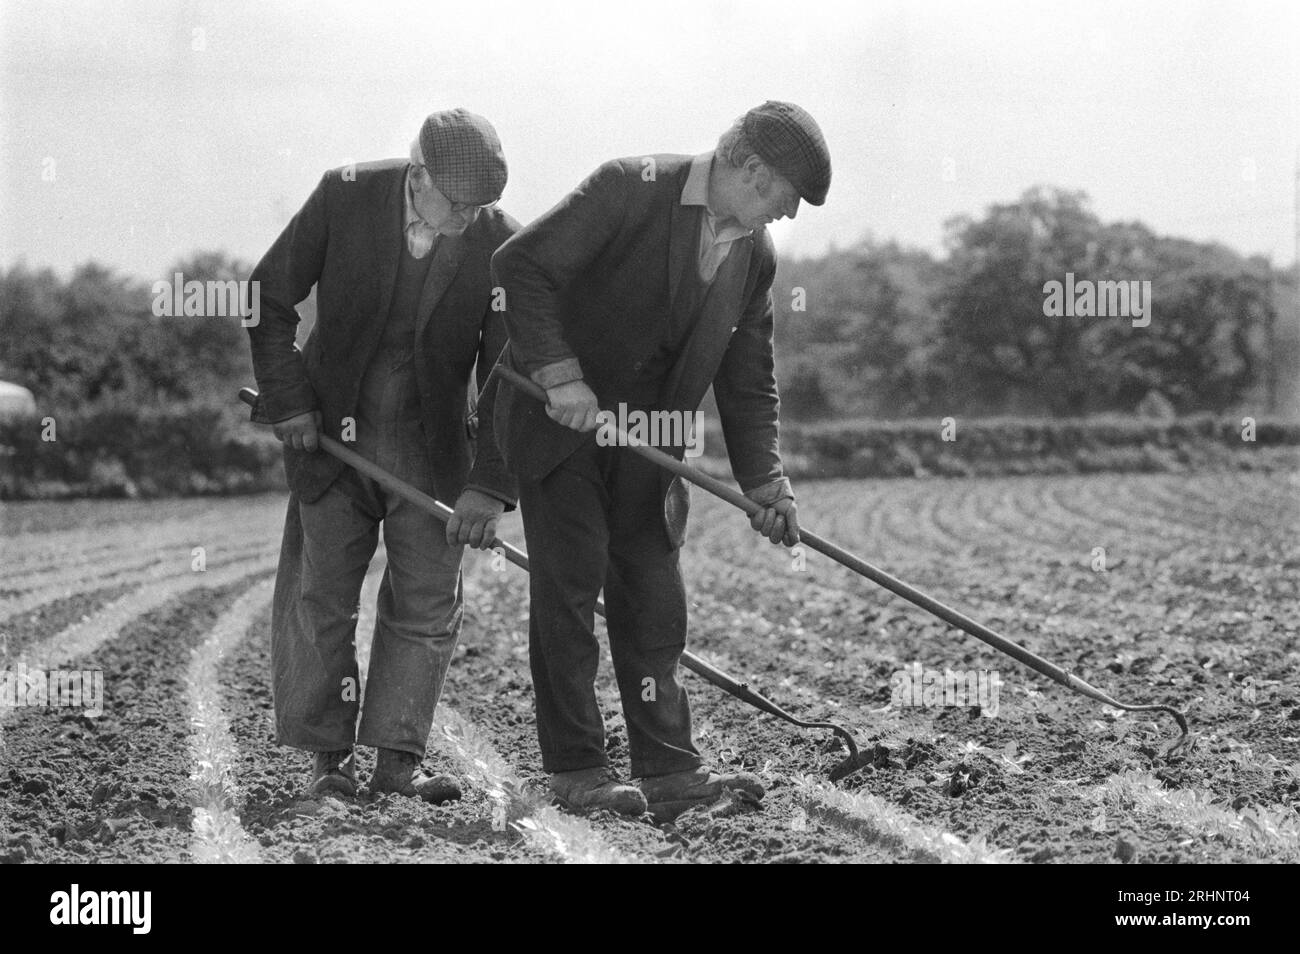 Farming East Angelia 1970s UK. Working on the land, two farm labours wearing tweed flat caps and jackets, work together hoeing a field by hand. Using a Draw Hoe, hoeing cultivates the soil and remove weeds. Norfolk, England 1973. HOMER SYKES. Stock Photo